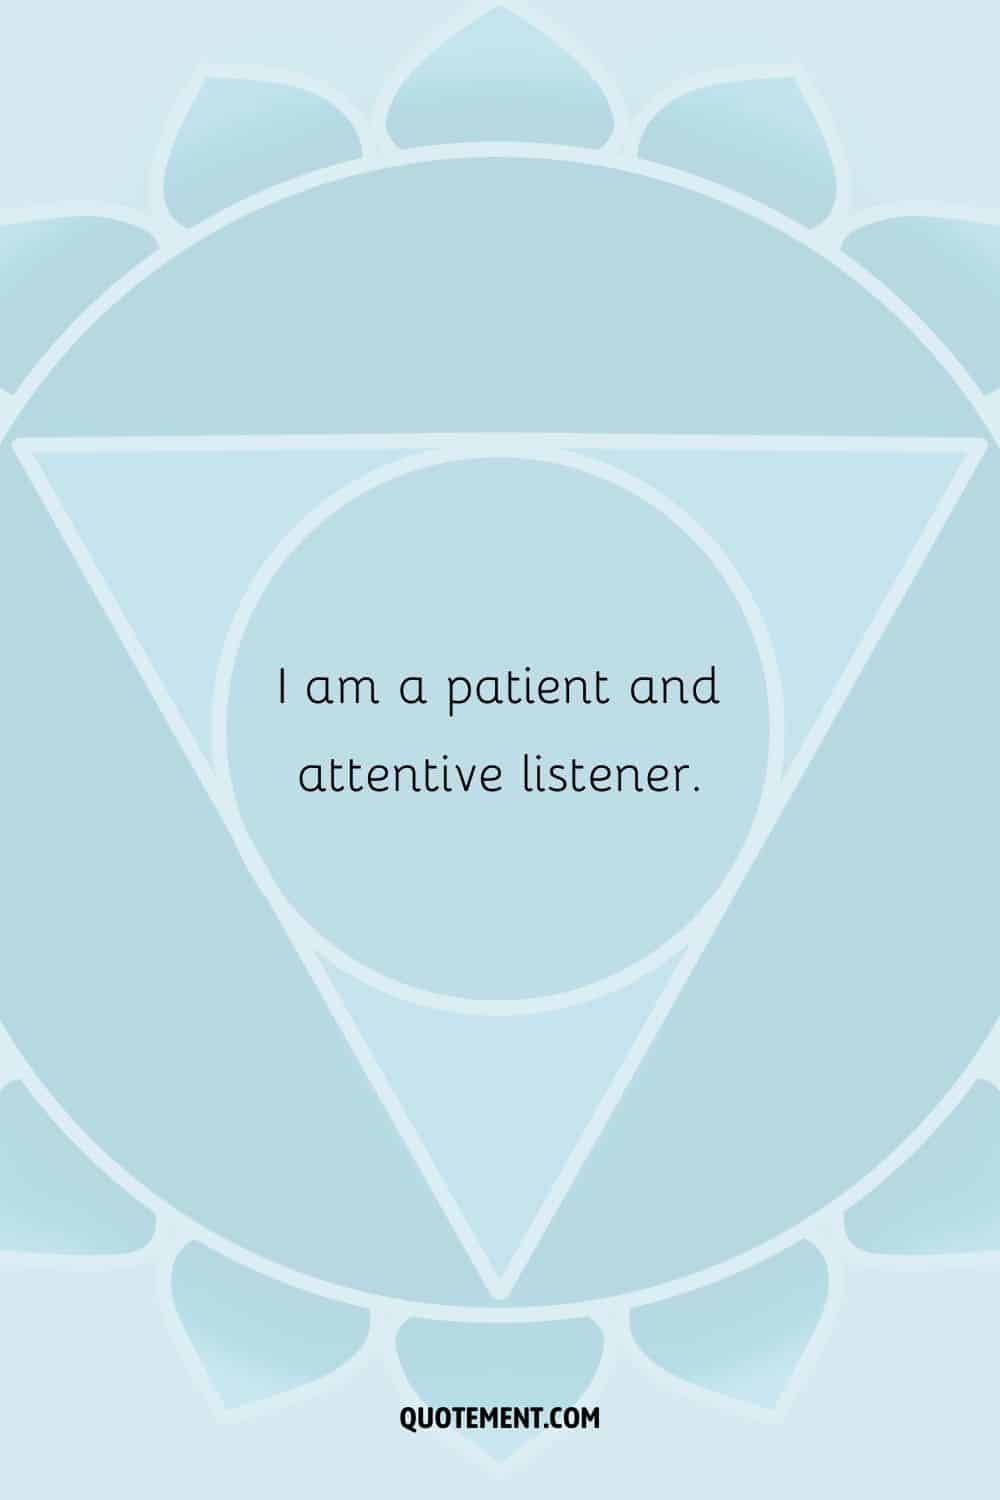 “I am a patient and attentive listener.”